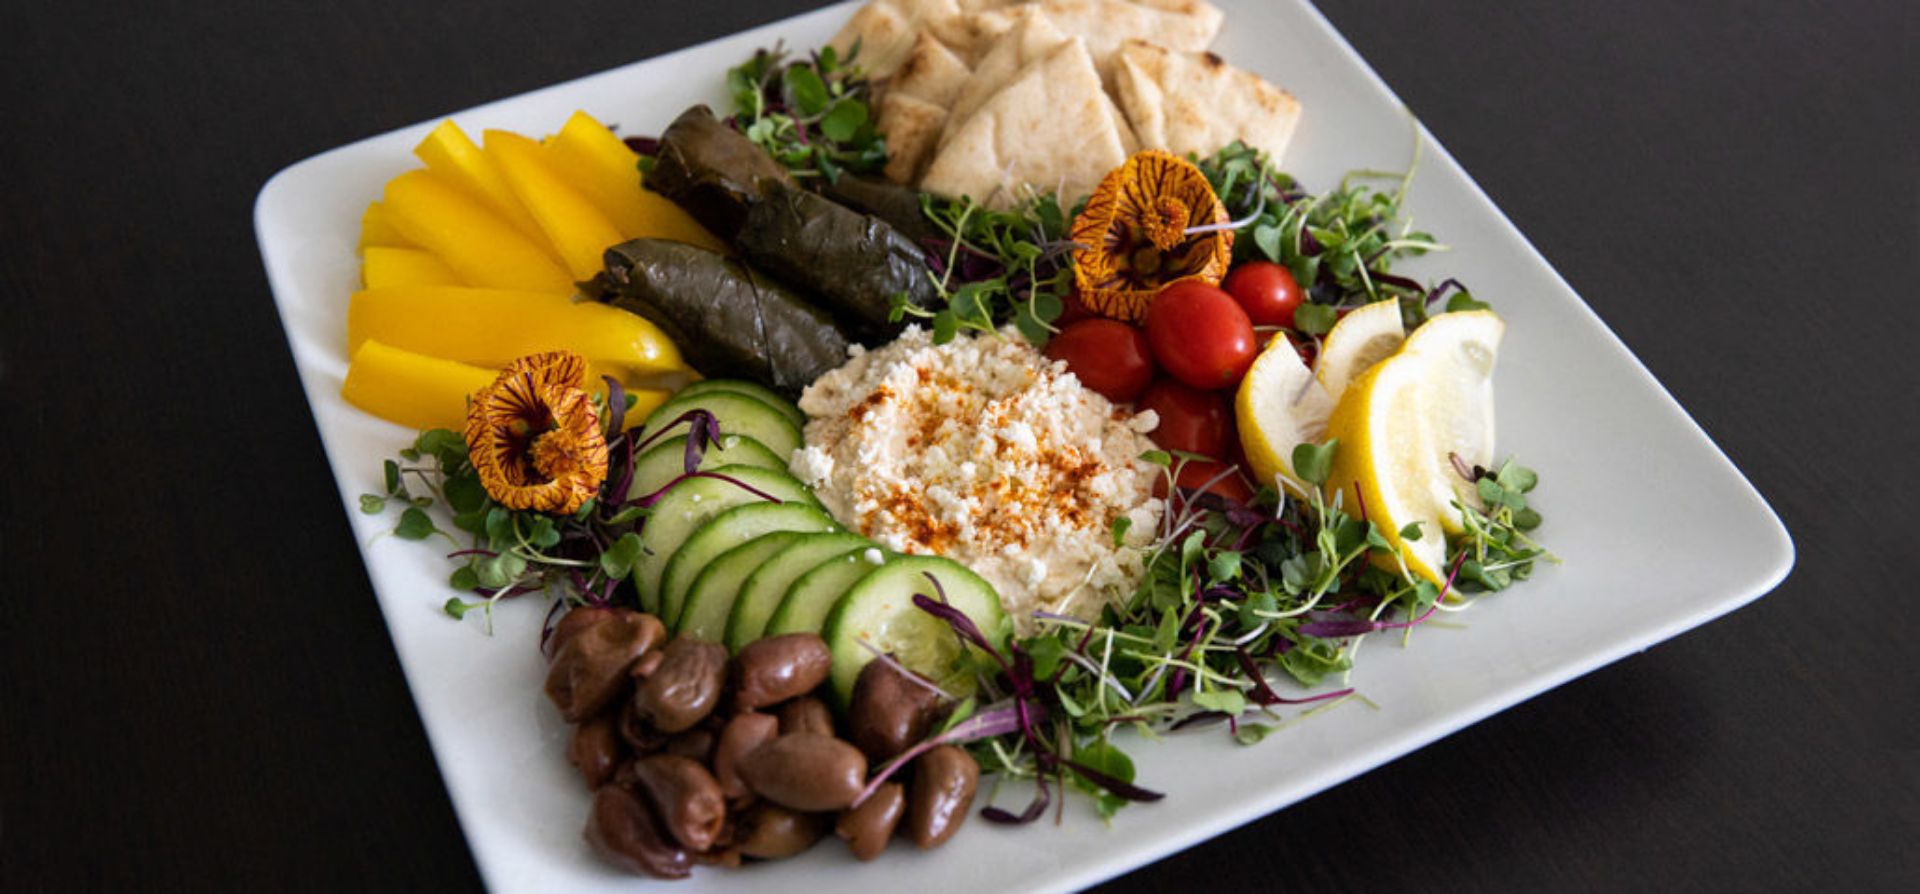 Colorful platter with vegetables, pita, and hummus, Inn at Bay Harbor amenities.